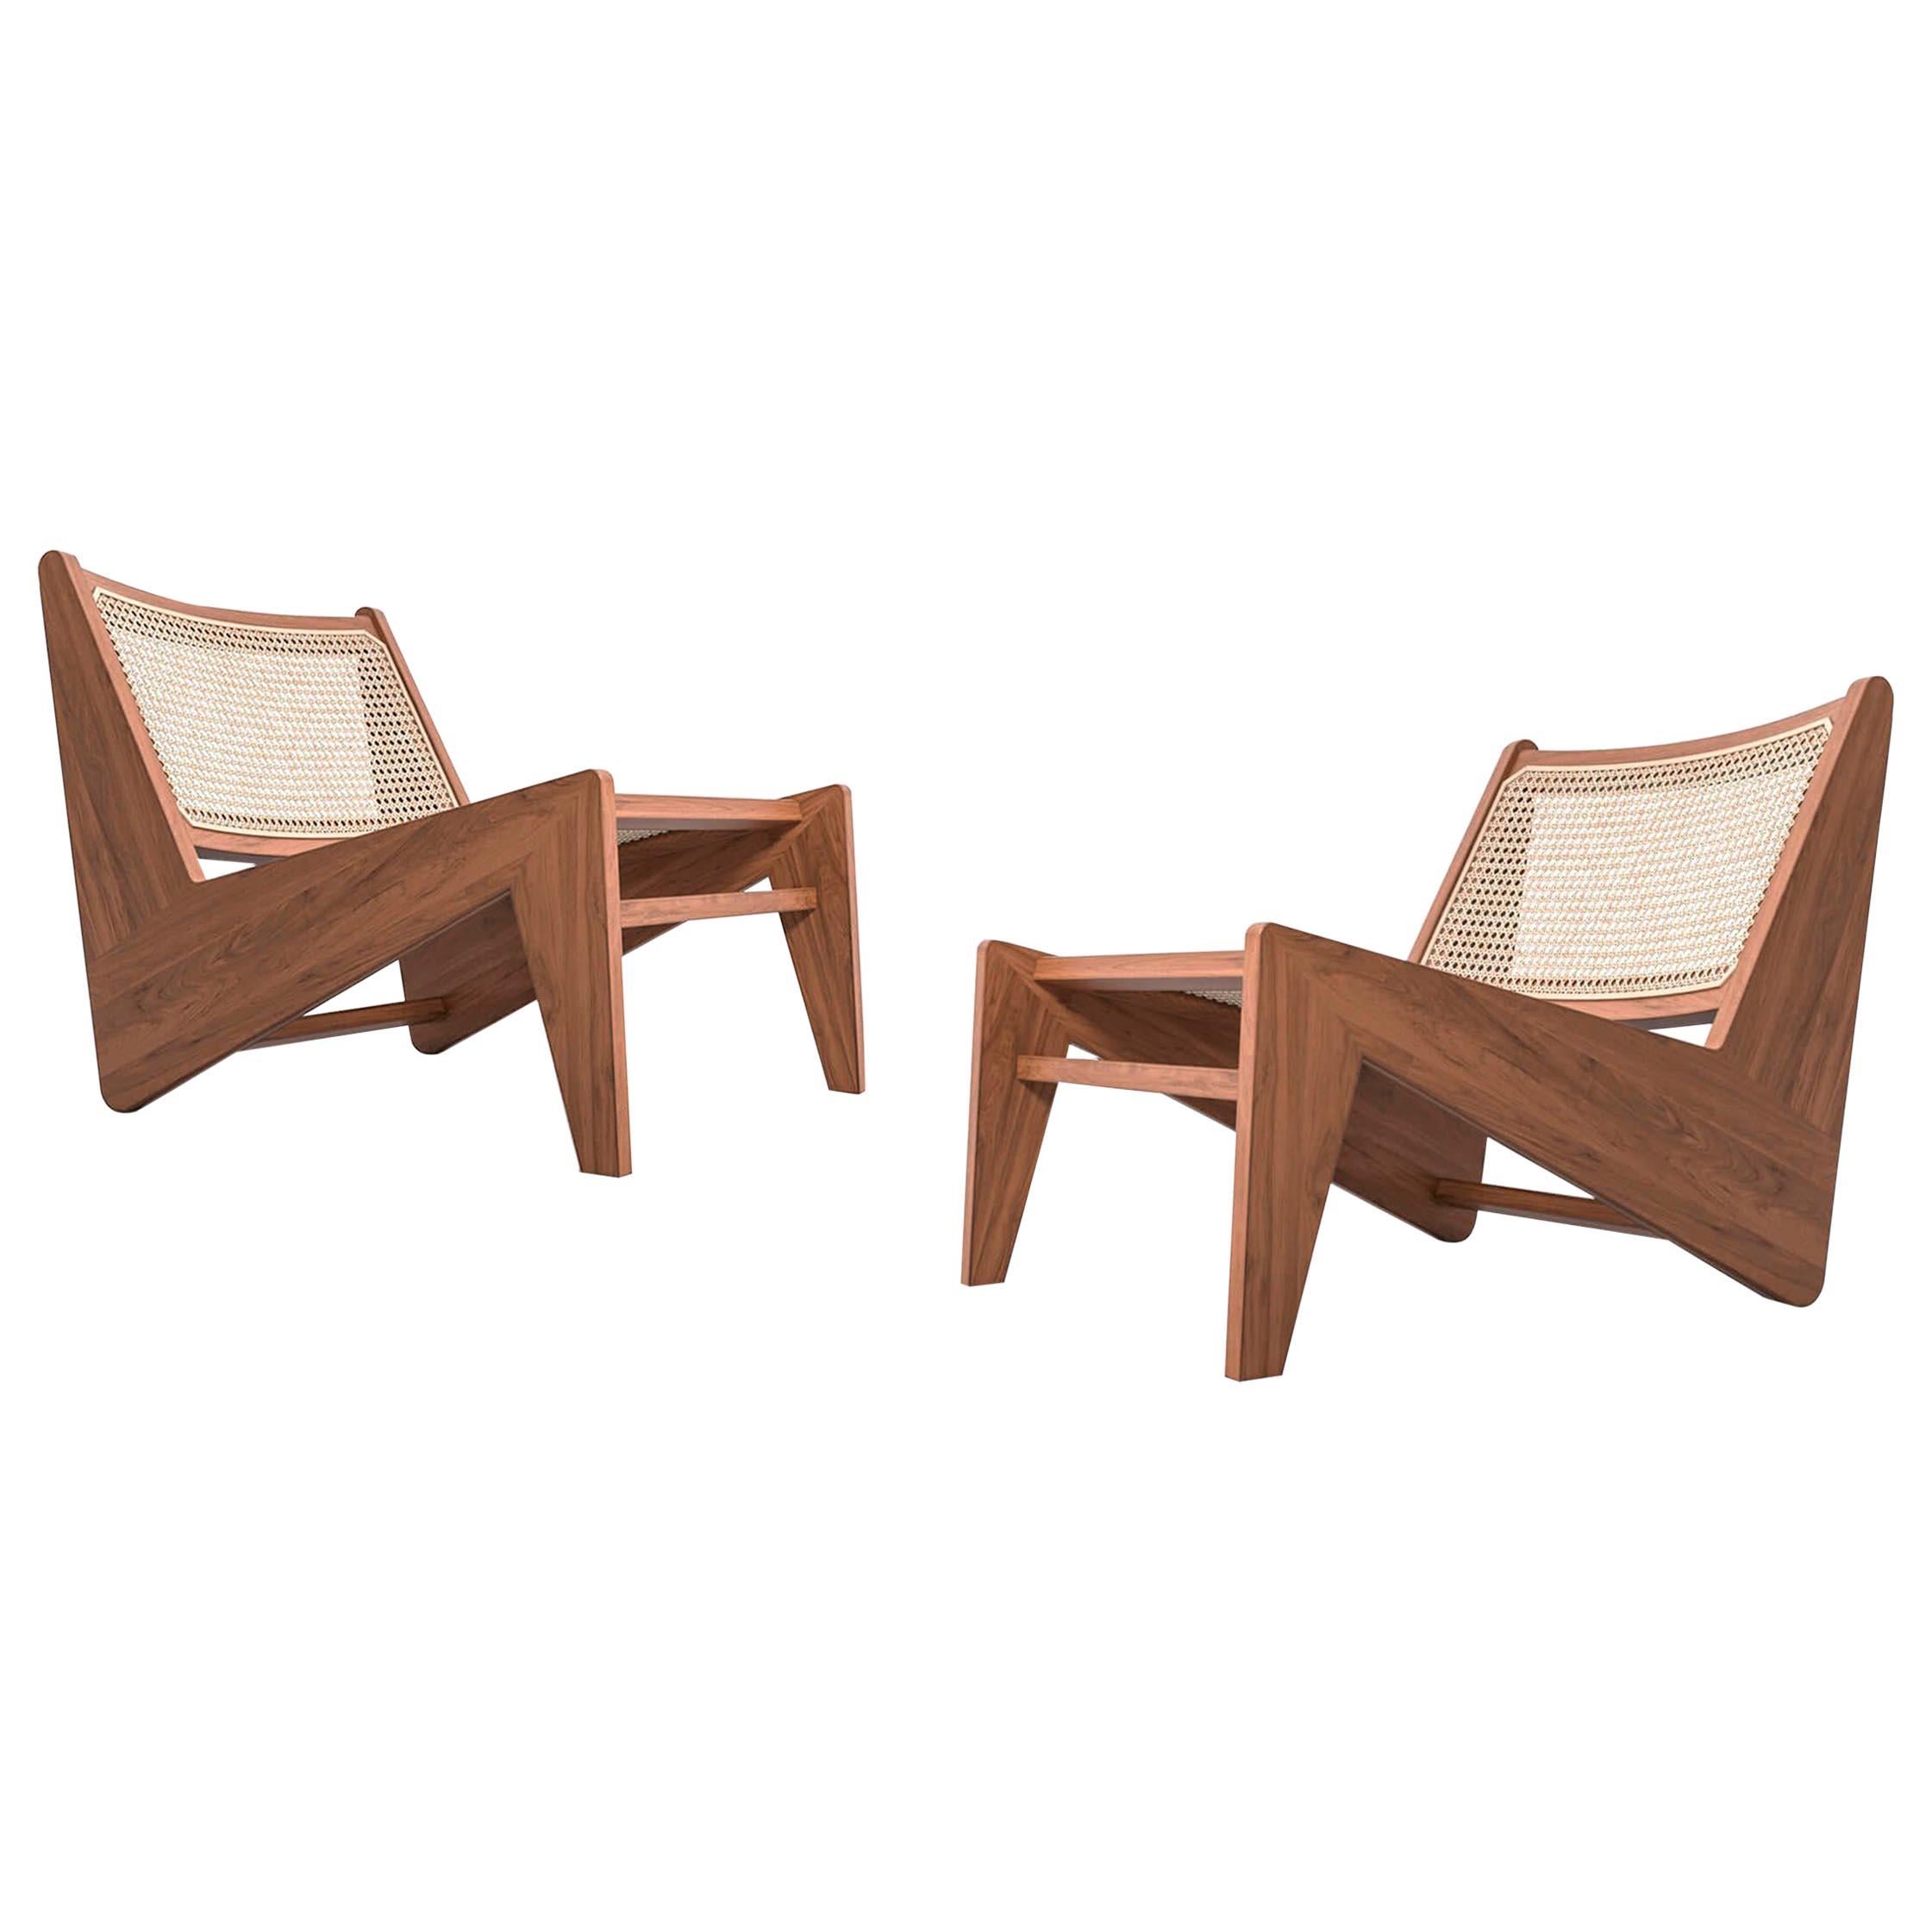 Set of Two Pierre Jeanneret Kangaroo Low Armchair, Wood and Woven Viennese Cane